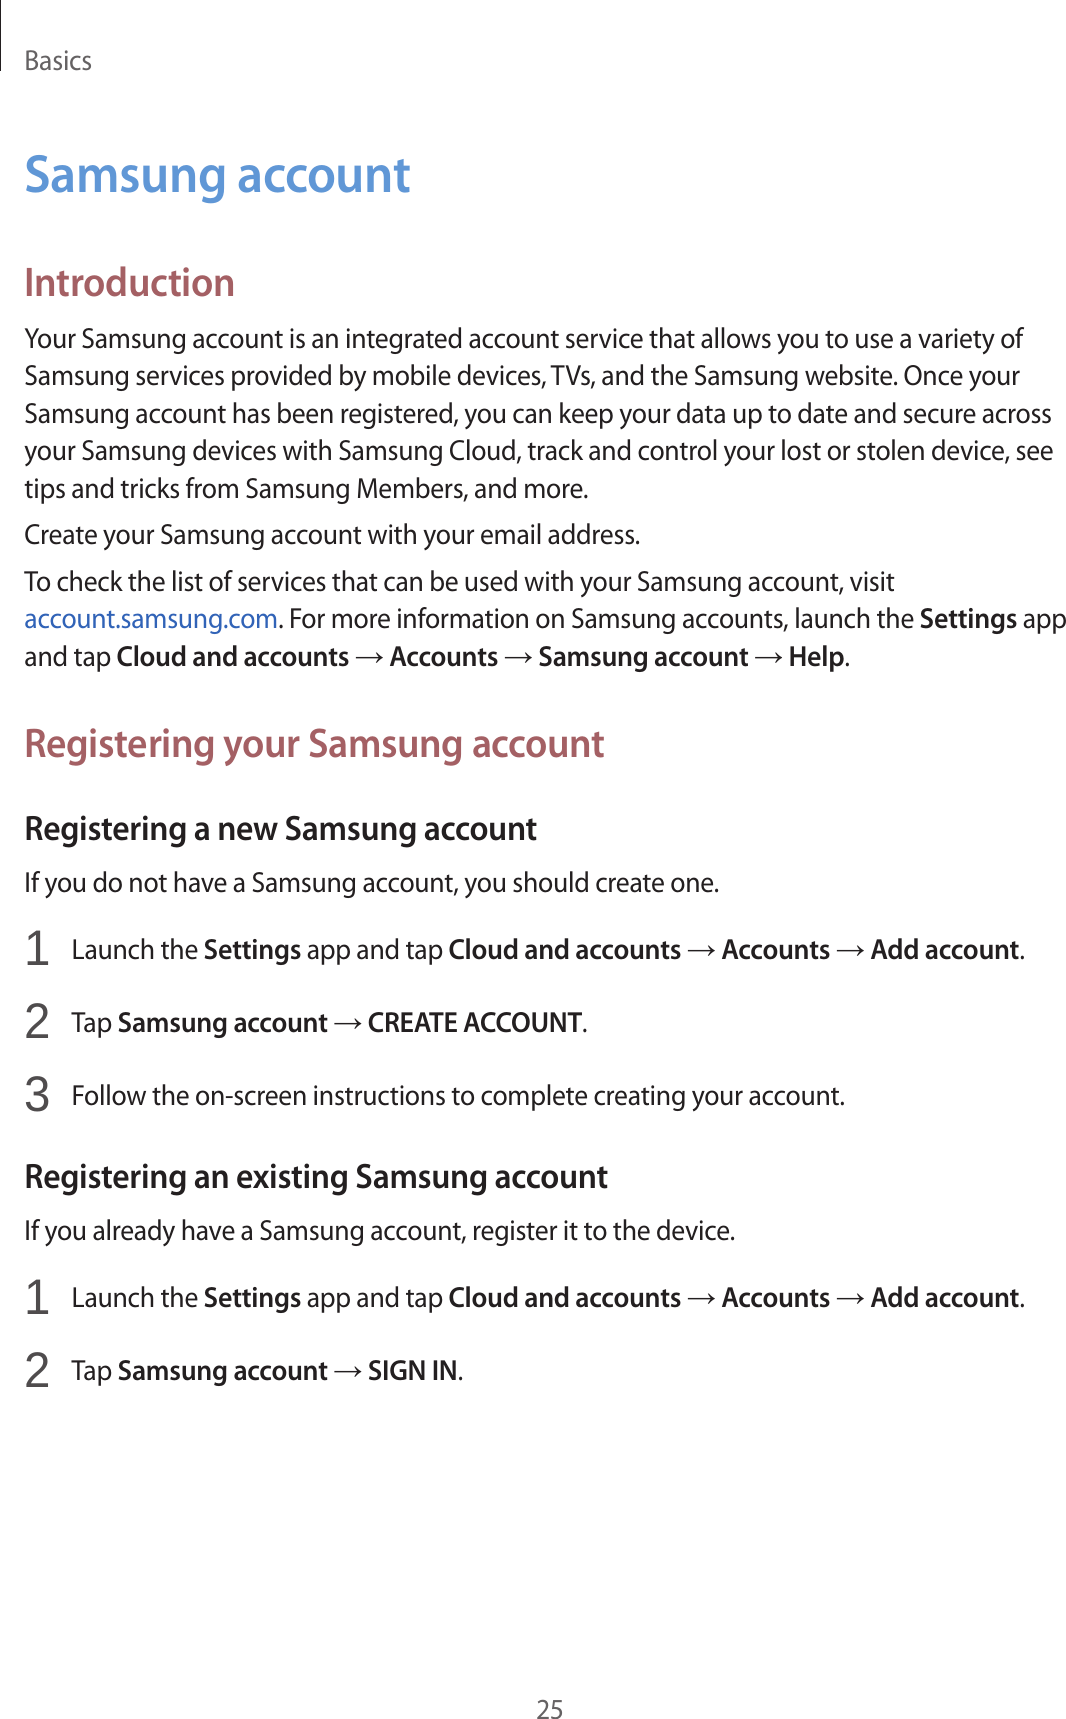 Basics25Samsung accountIntroductionYour Samsung account is an integrated account service that allows you to use a variety of Samsung services provided by mobile devices, TVs, and the Samsung website. Once your Samsung account has been registered, you can keep your data up to date and secure across your Samsung devices with Samsung Cloud, track and control your lost or stolen device, see tips and tricks from Samsung Members, and more.Create your Samsung account with your email address.To check the list of services that can be used with your Samsung account, visit account.samsung.com. For more information on Samsung accounts, launch the Settings app and tap Cloud and accounts → Accounts → Samsung account → Help.Registering your Samsung accountRegistering a new Samsung accountIf you do not have a Samsung account, you should create one.1  Launch the Settings app and tap Cloud and accounts → Accounts → Add account.2  Tap Samsung account → CREATE ACCOUNT.3  Follow the on-screen instructions to complete creating your account.Registering an existing Samsung accountIf you already have a Samsung account, register it to the device.1  Launch the Settings app and tap Cloud and accounts → Accounts → Add account.2  Tap Samsung account → SIGN IN.